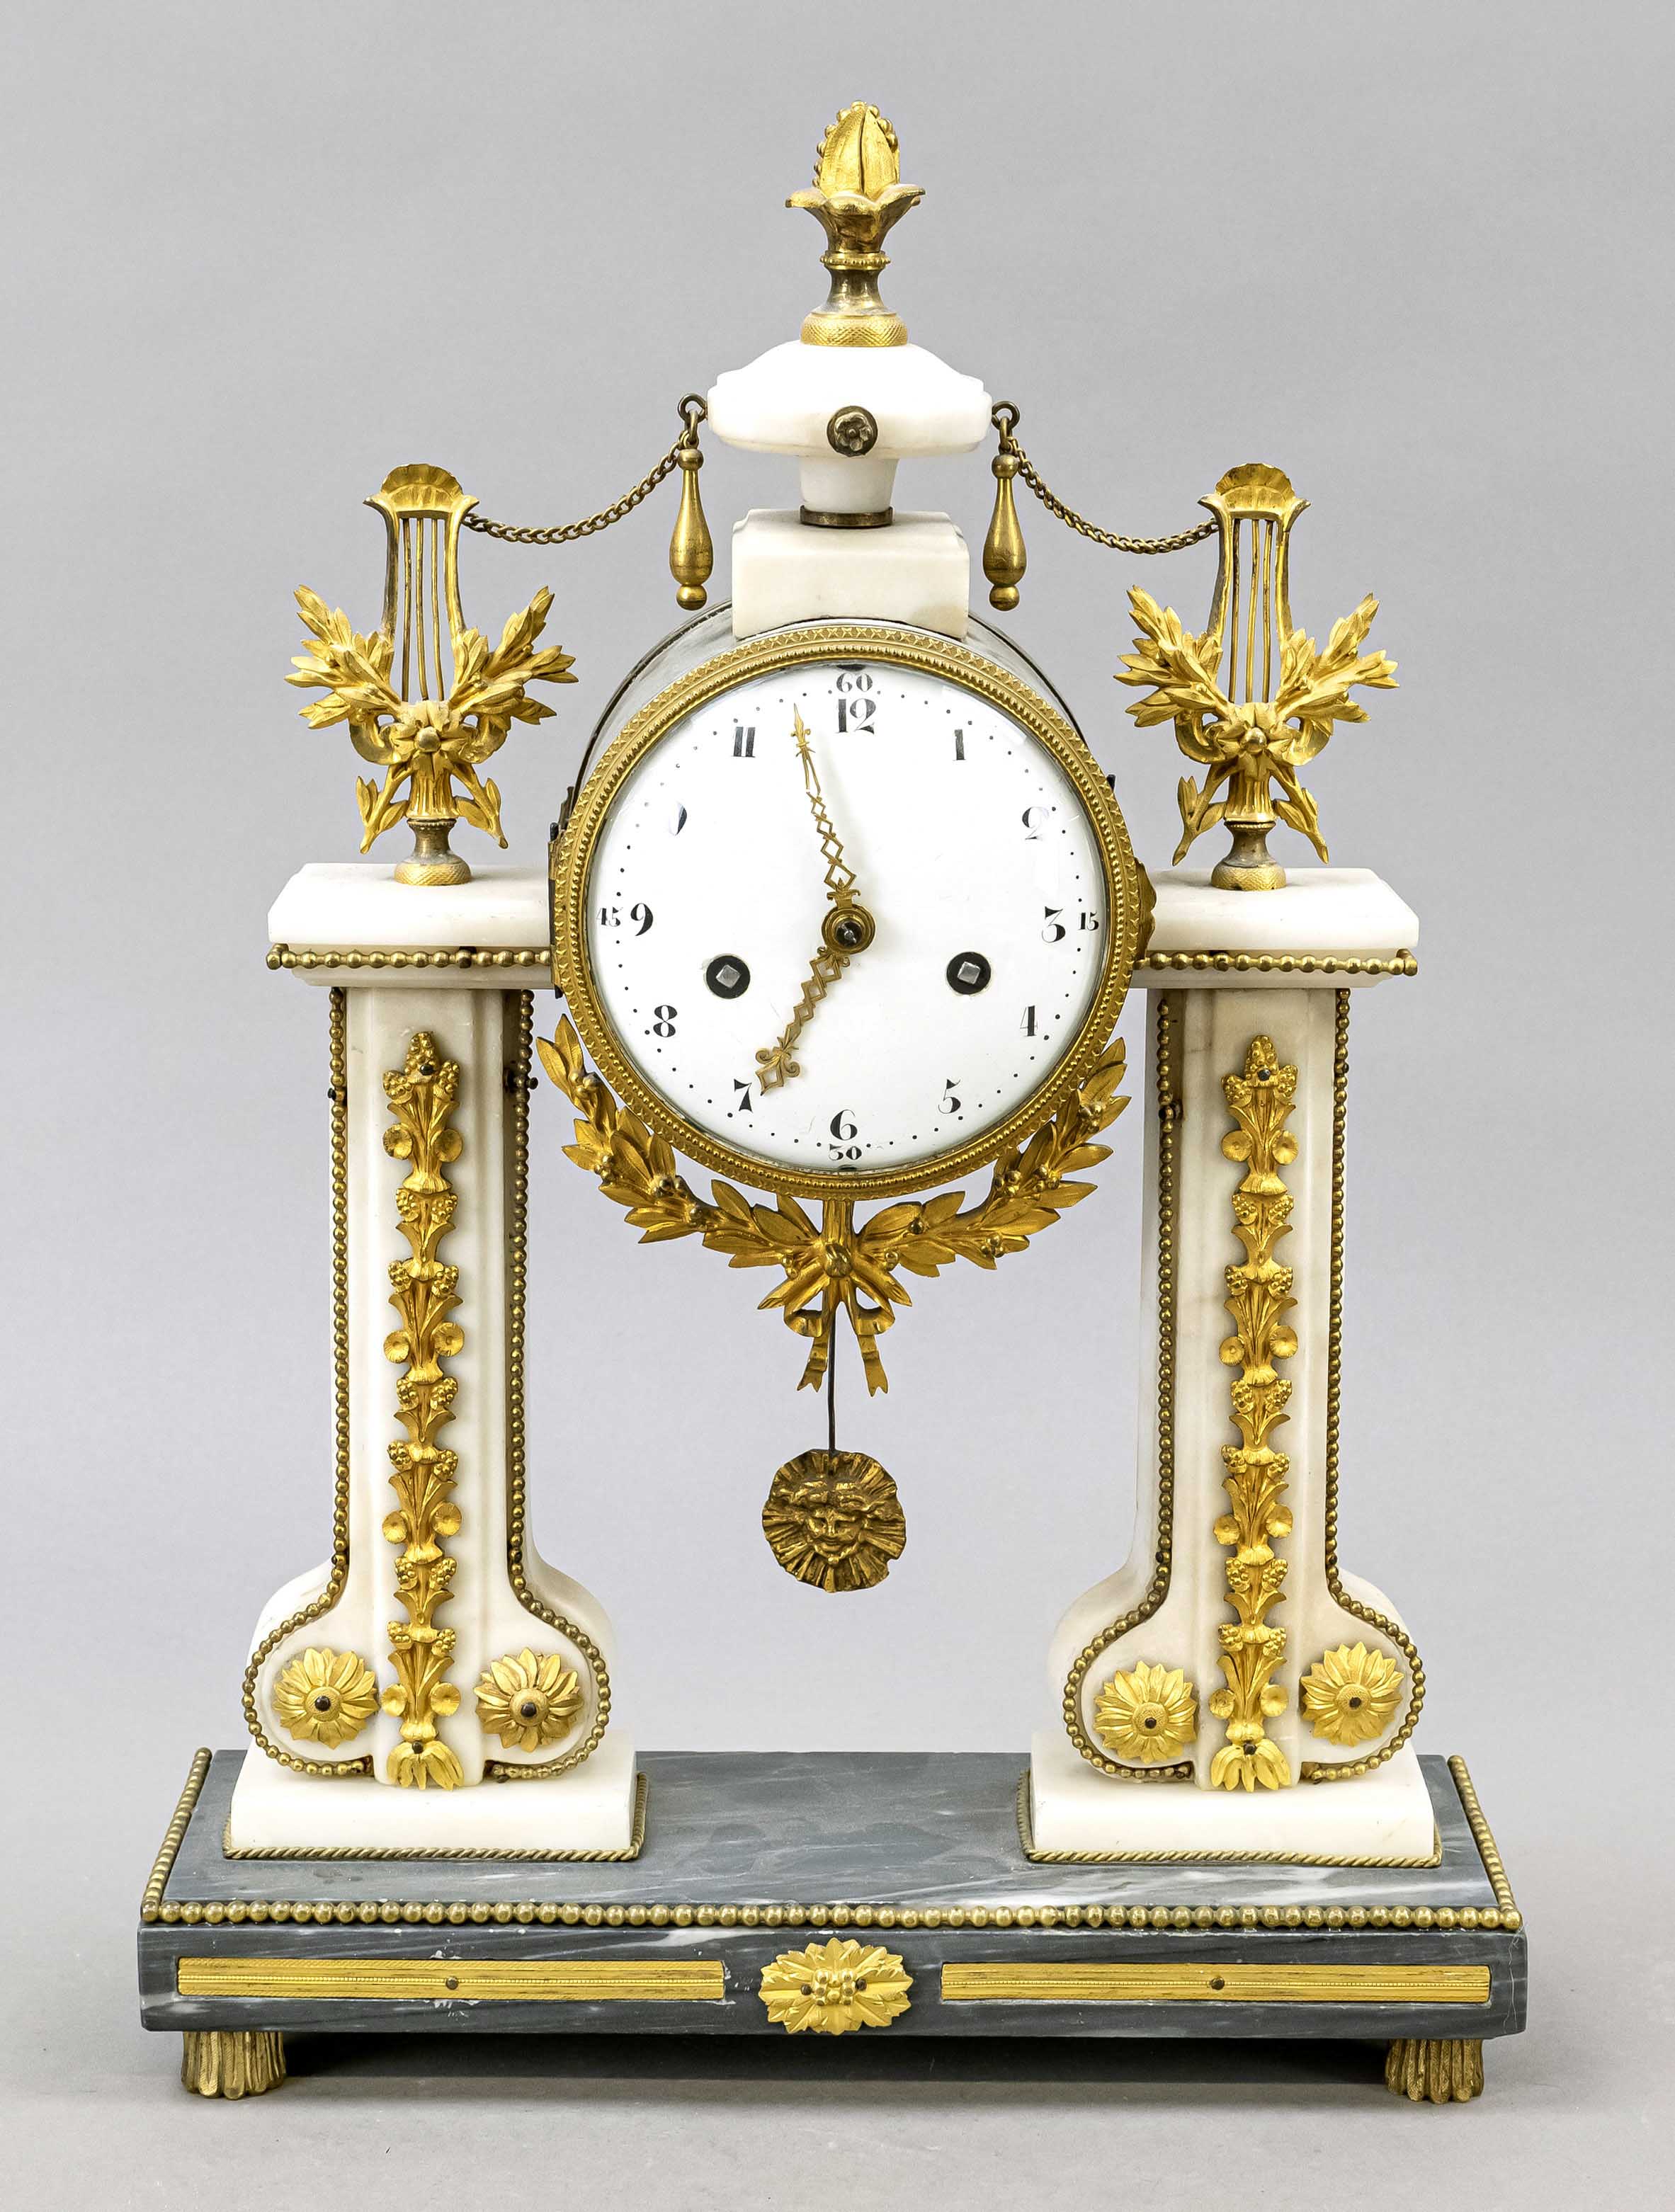 gray/white marble pendulum, 1st half 19th century, with gilded applications, crowned by lyre and